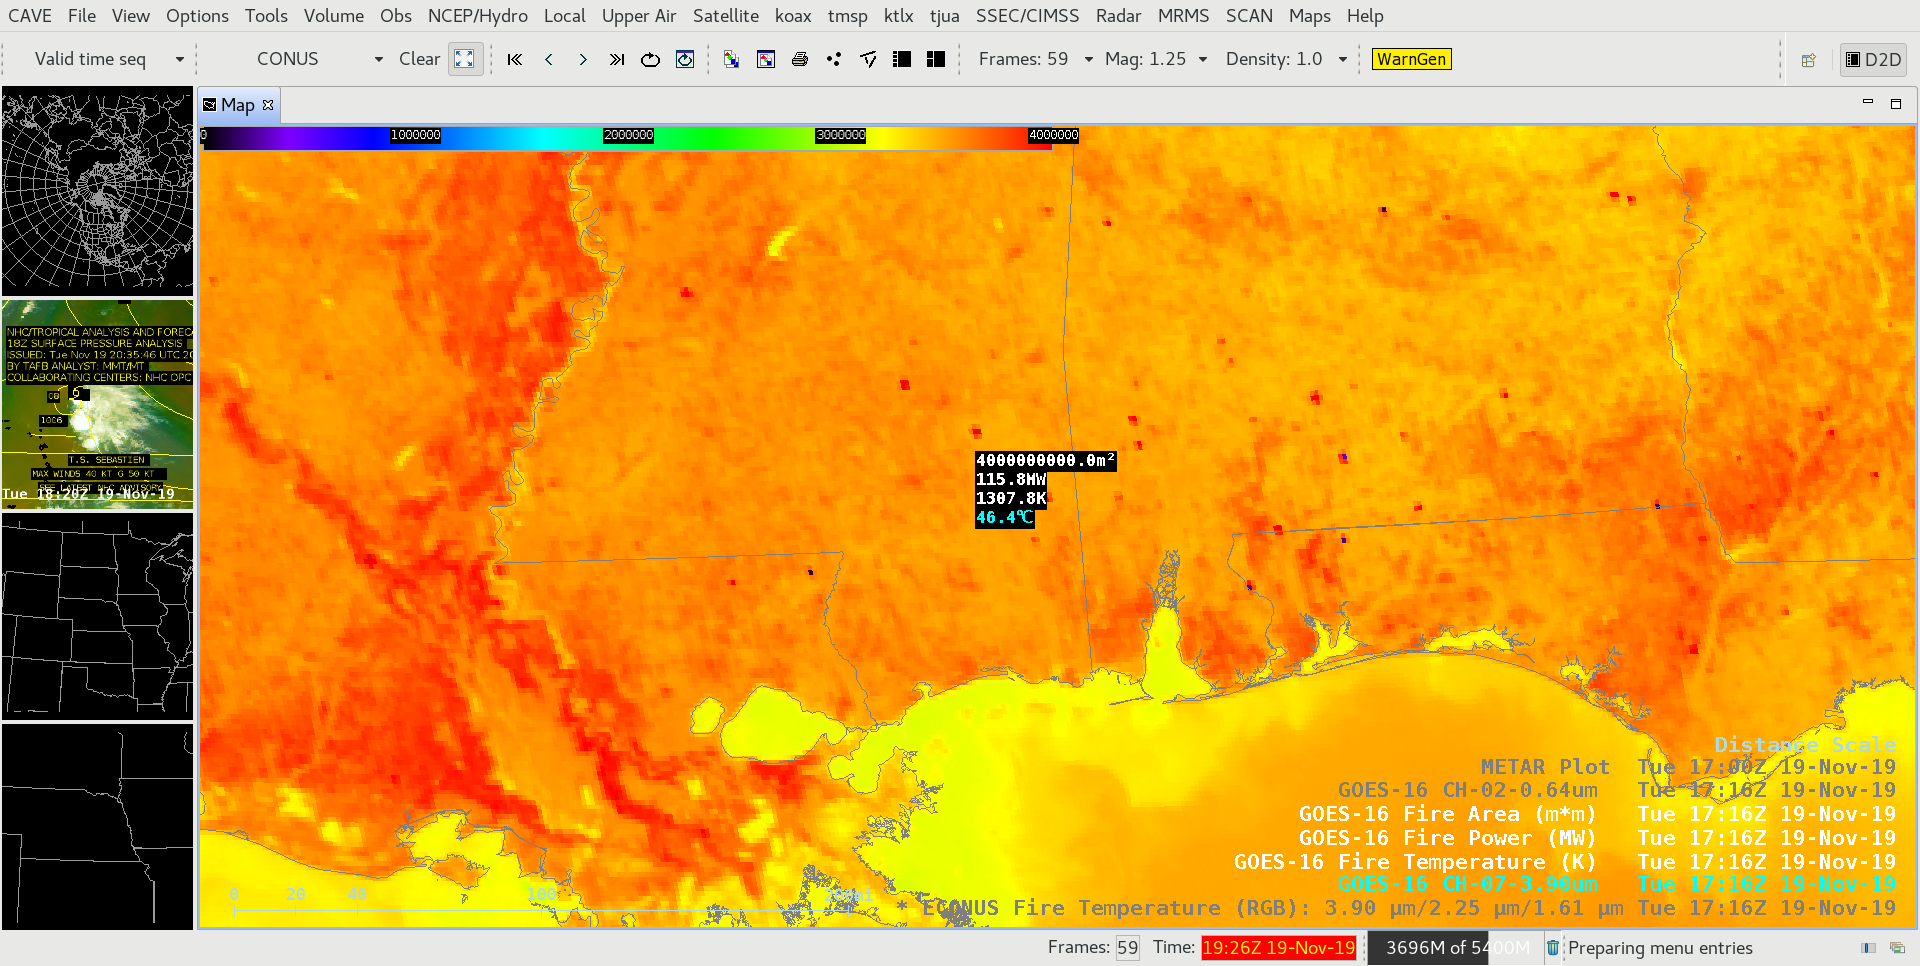 GOES-16 Shortwave Infrared (3.9 µm), Fire Temperature, Fire Power and Fire Area values at 1716 UTC [click to enlarge]